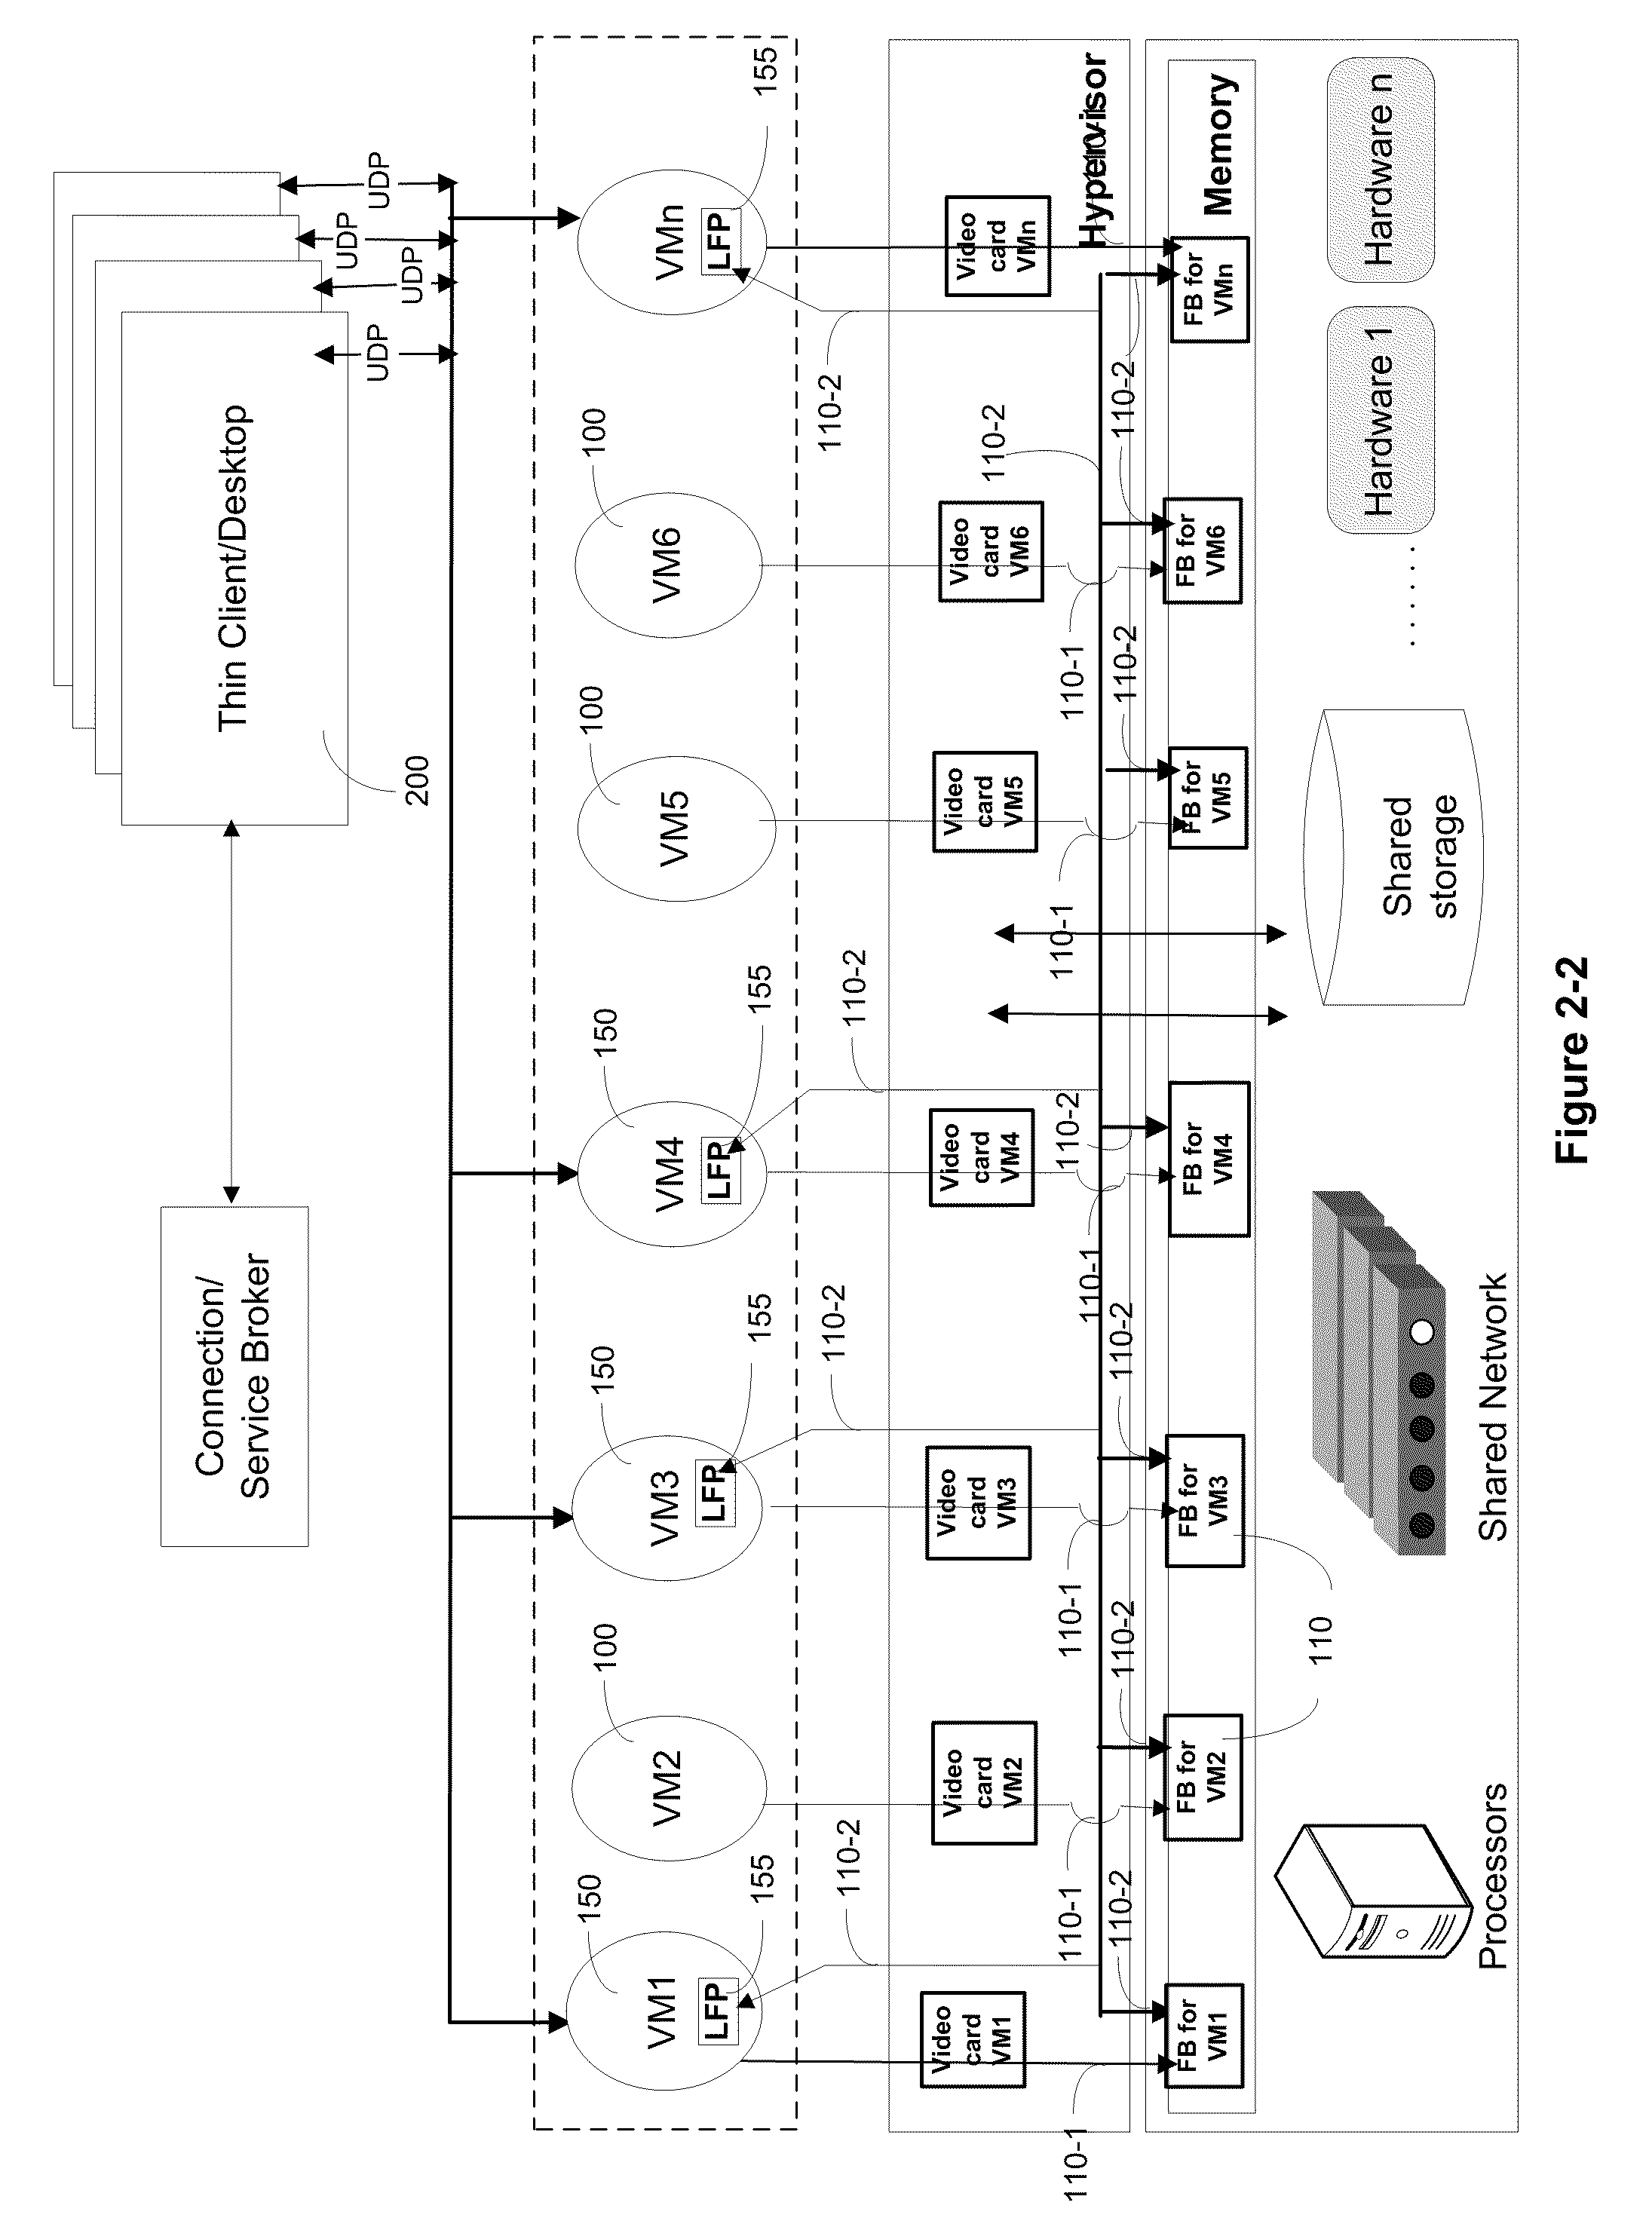 Systems and algorithm for interfacing with a virtualized computing service over a network using a lightweight client